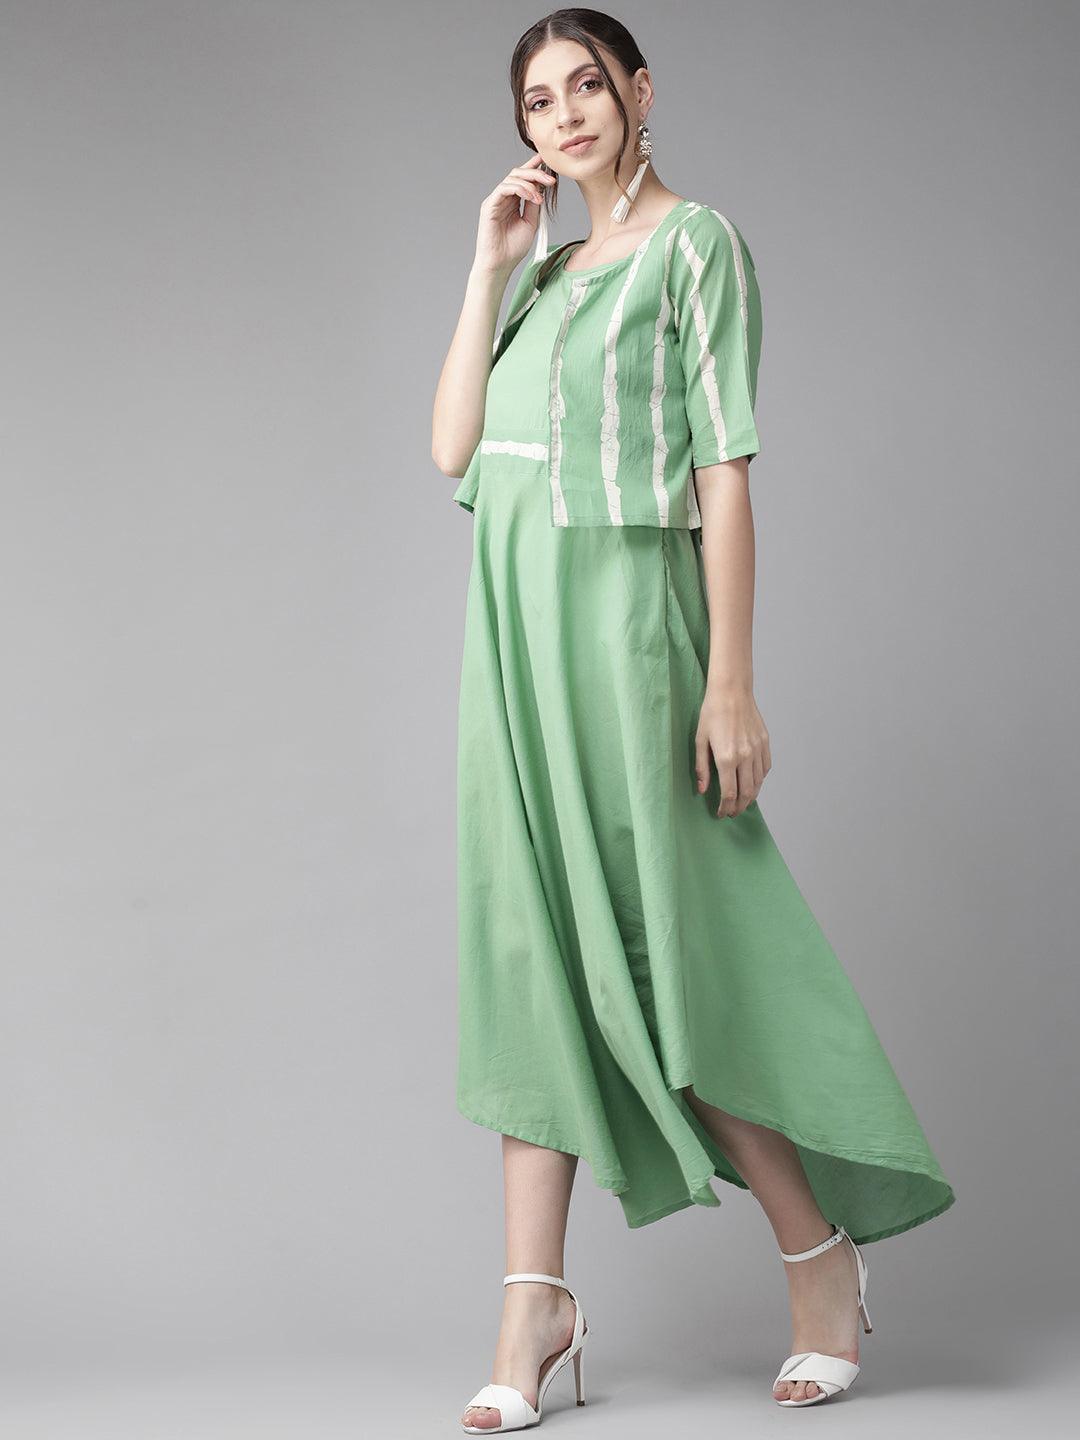 Green Solid A-Line Dress with Jacket (Fully Stitched) - Znxclothing